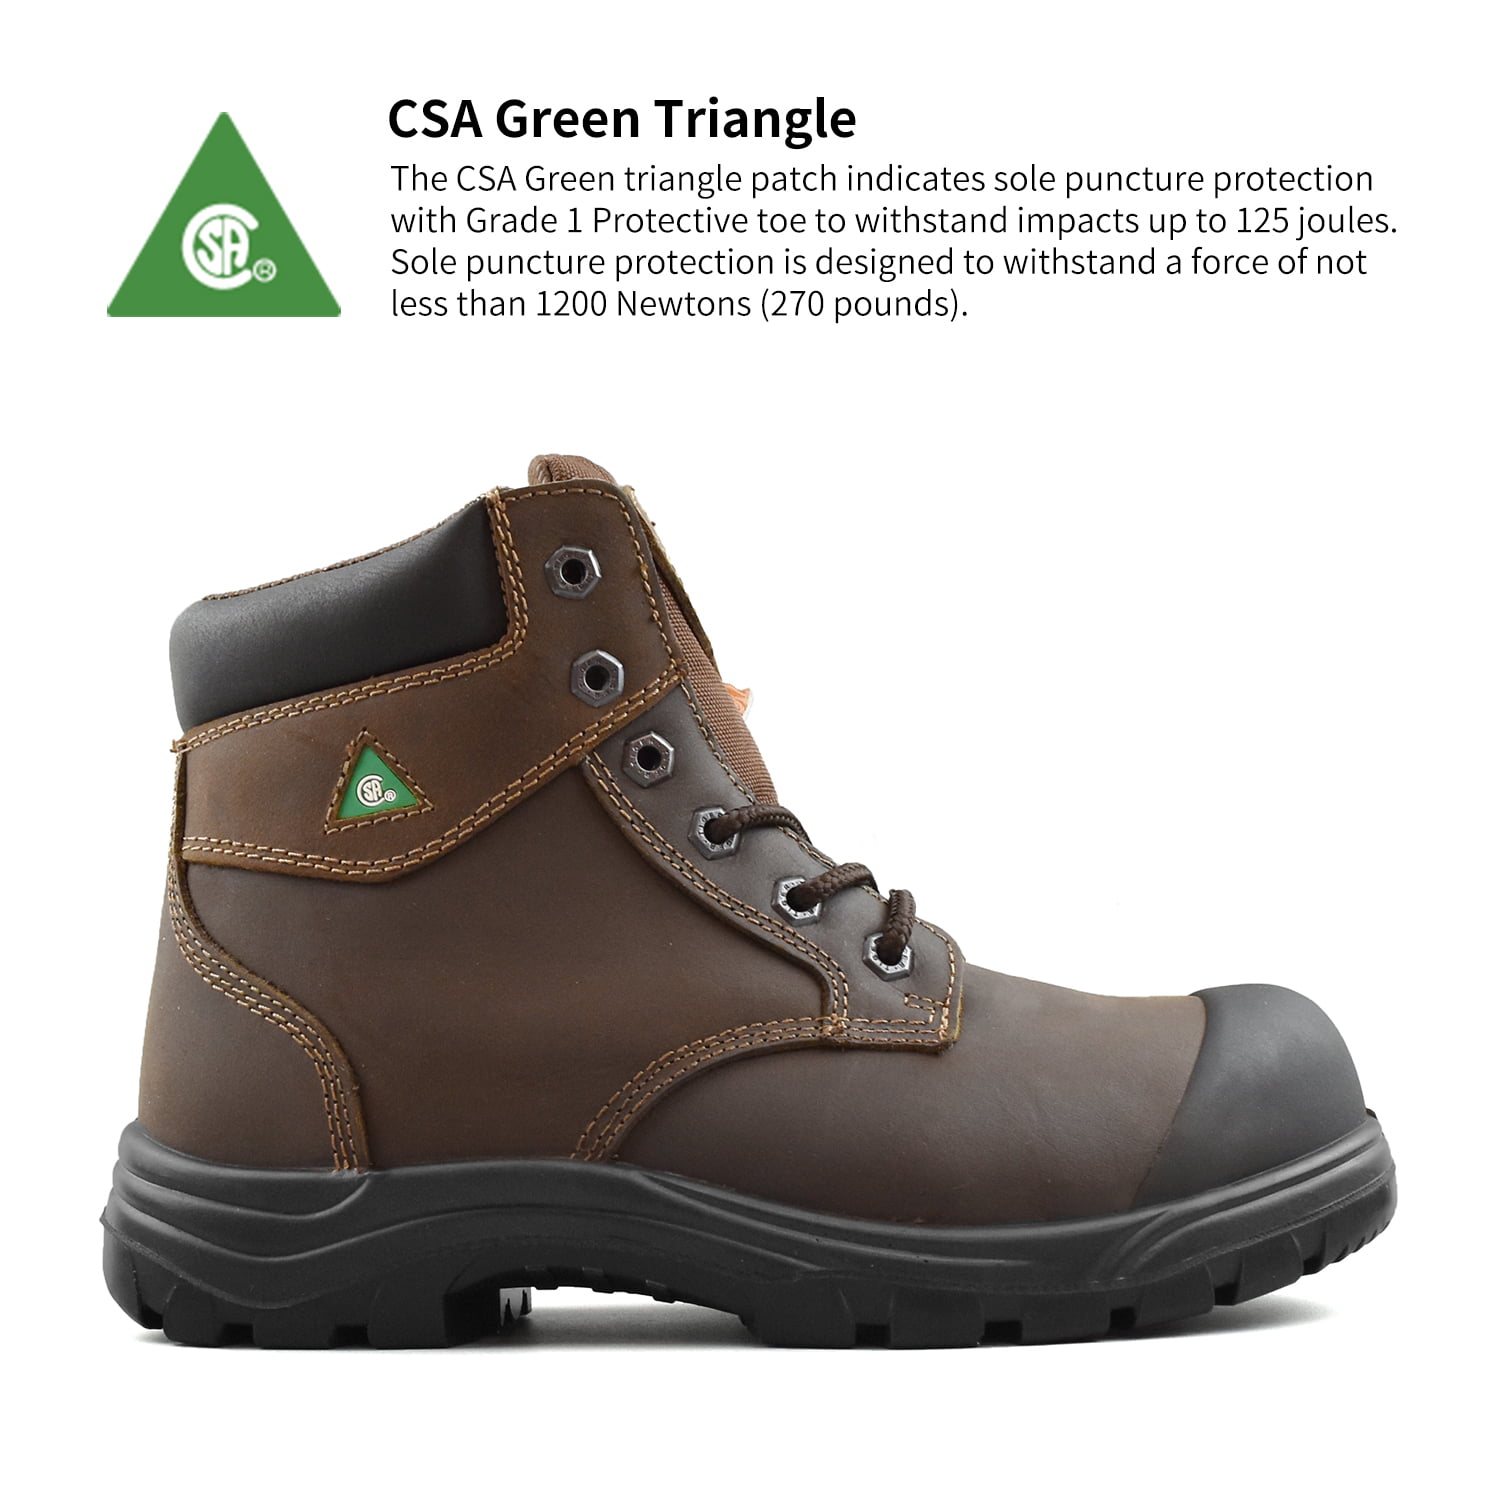 Tiger Safety CSA Men/'s Steel Toe Leather Work Safety Boots 3055